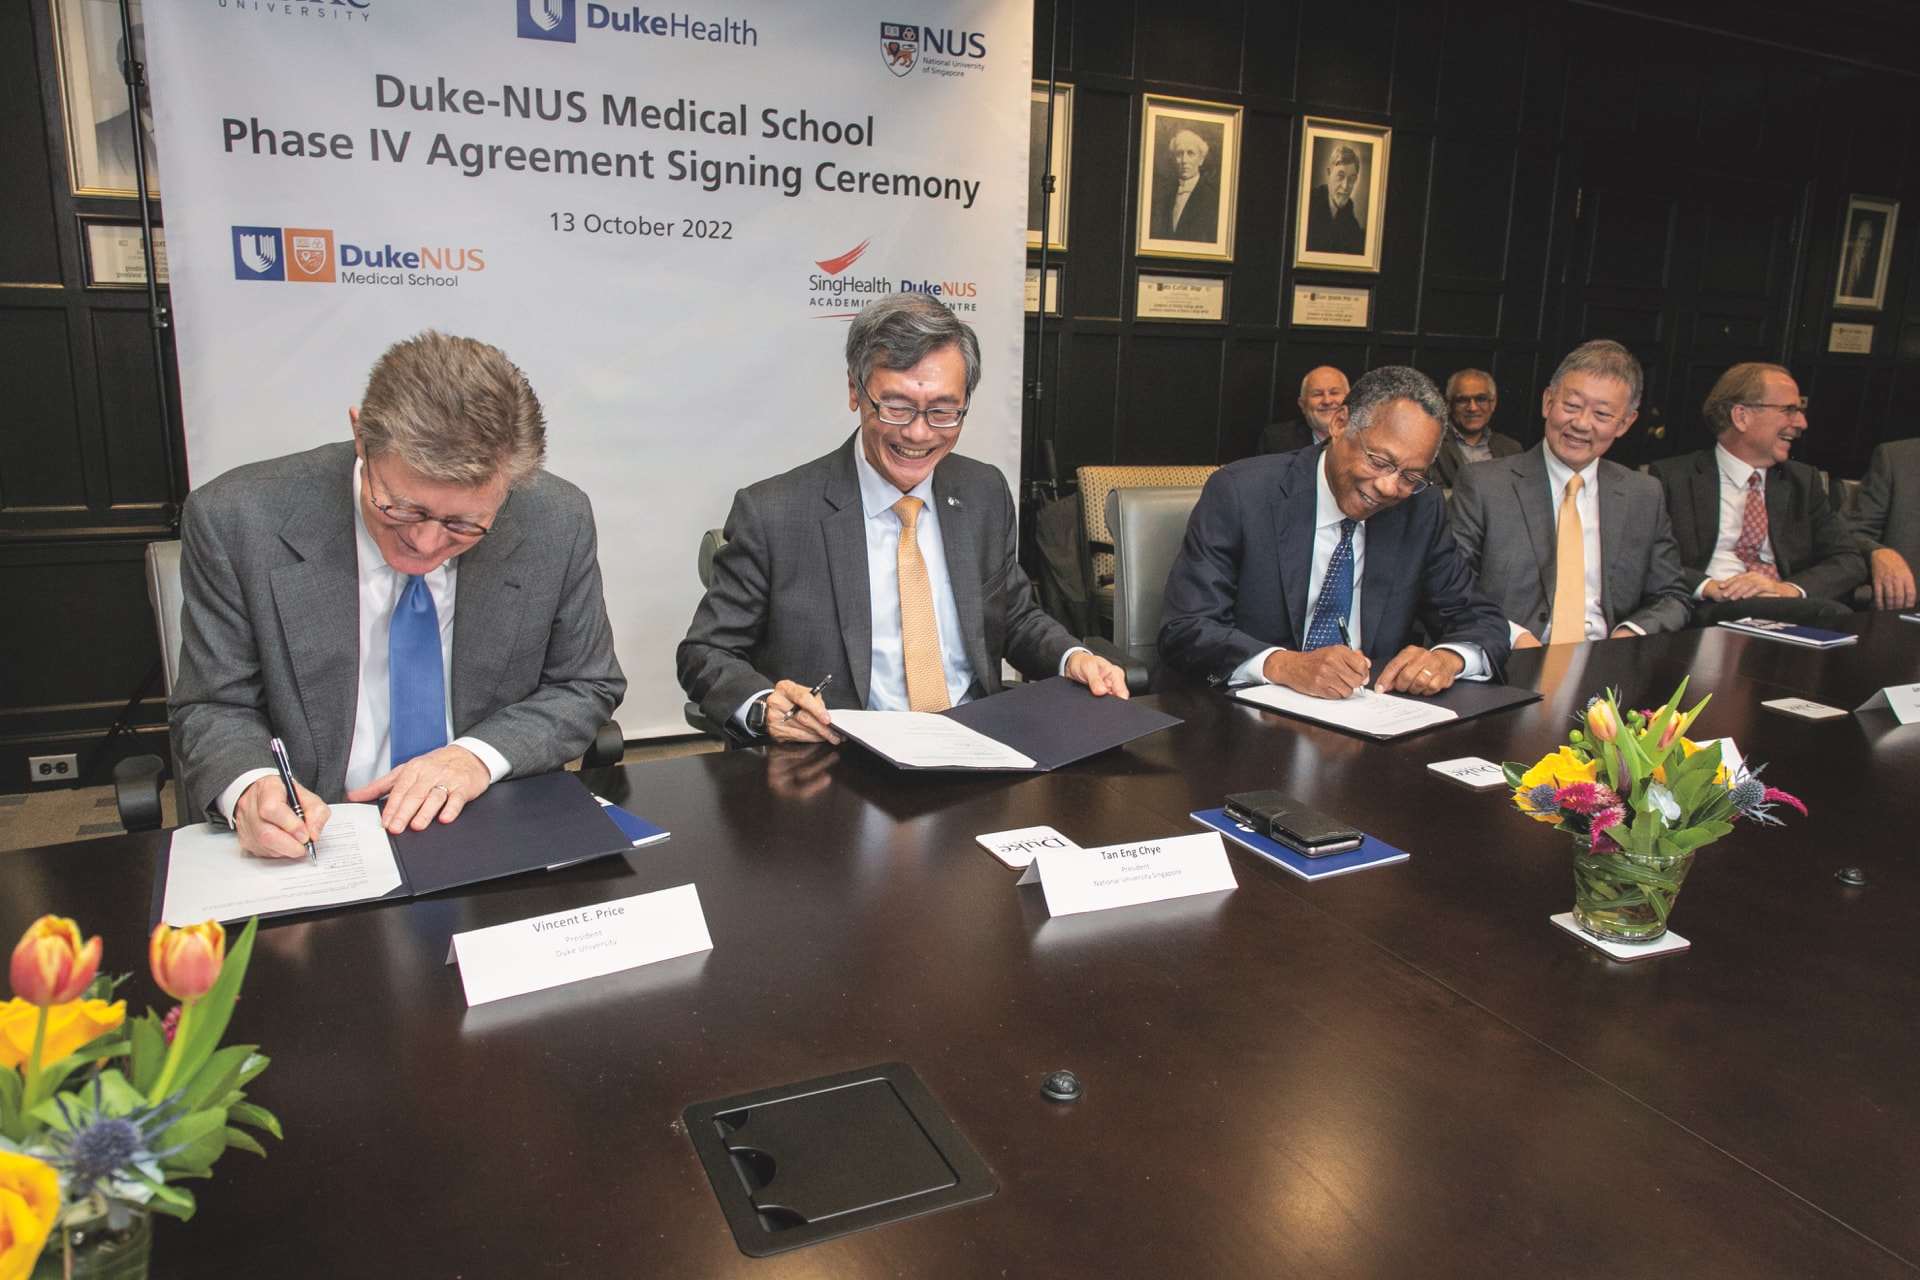 President Price and Singapore's Duke-NUS Medical School renewing their partnership agreement. Photo by Chris Hildreth